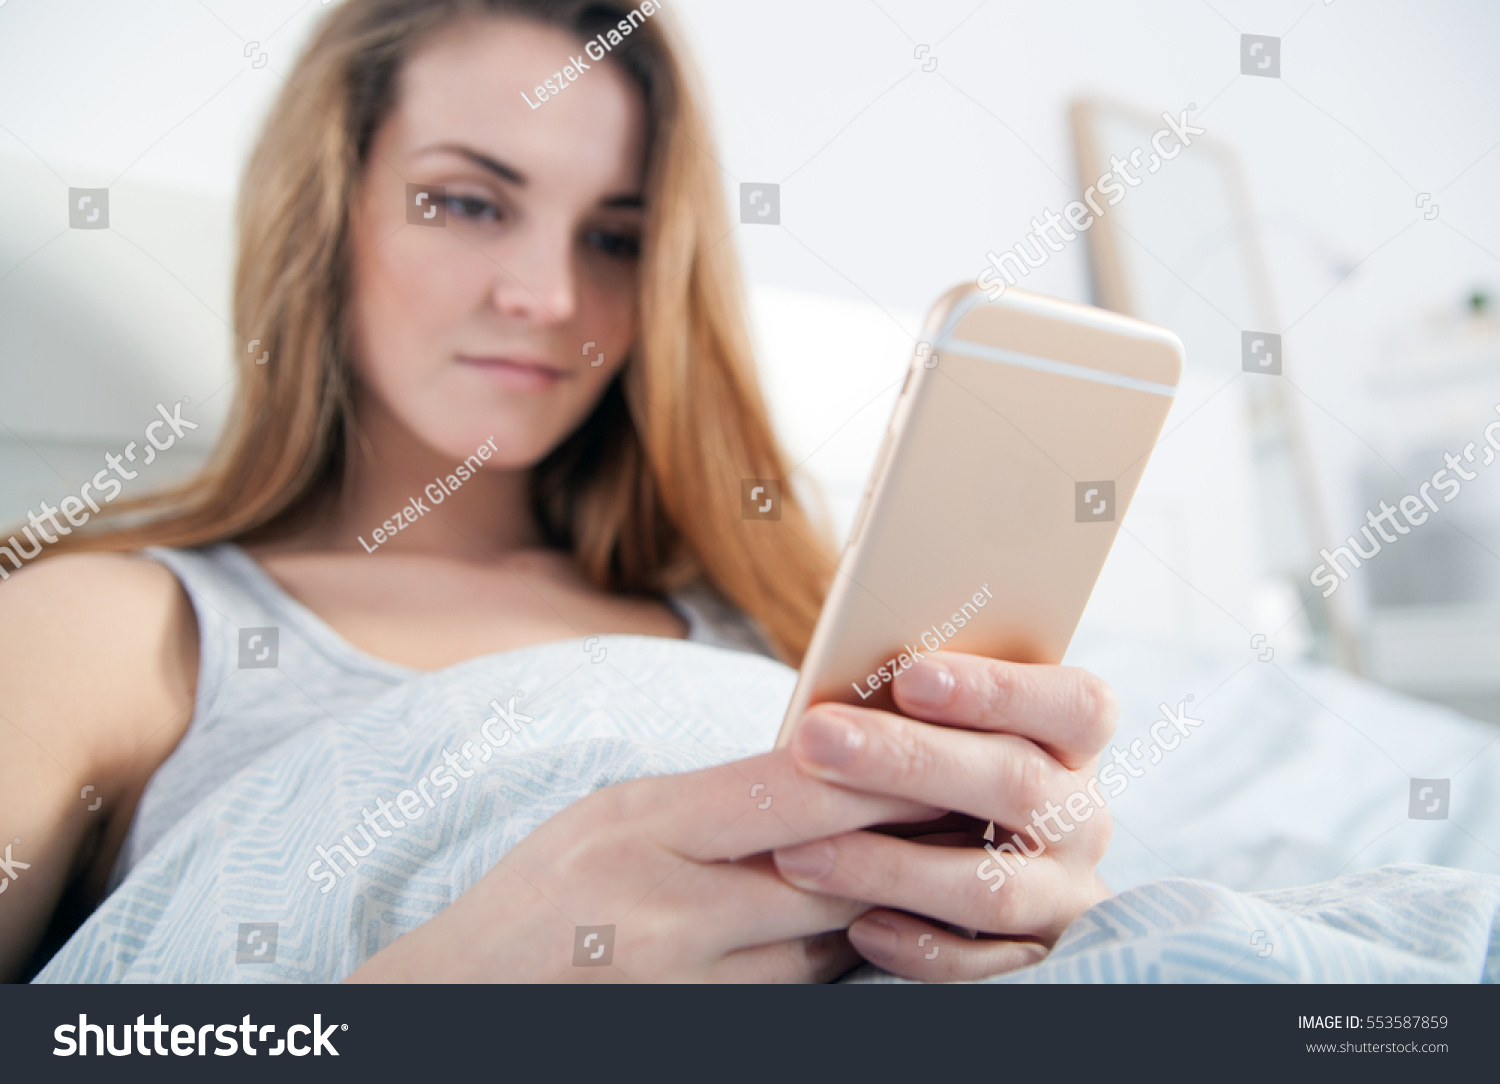 Young woman checking her smart phone lying in bed #553587859